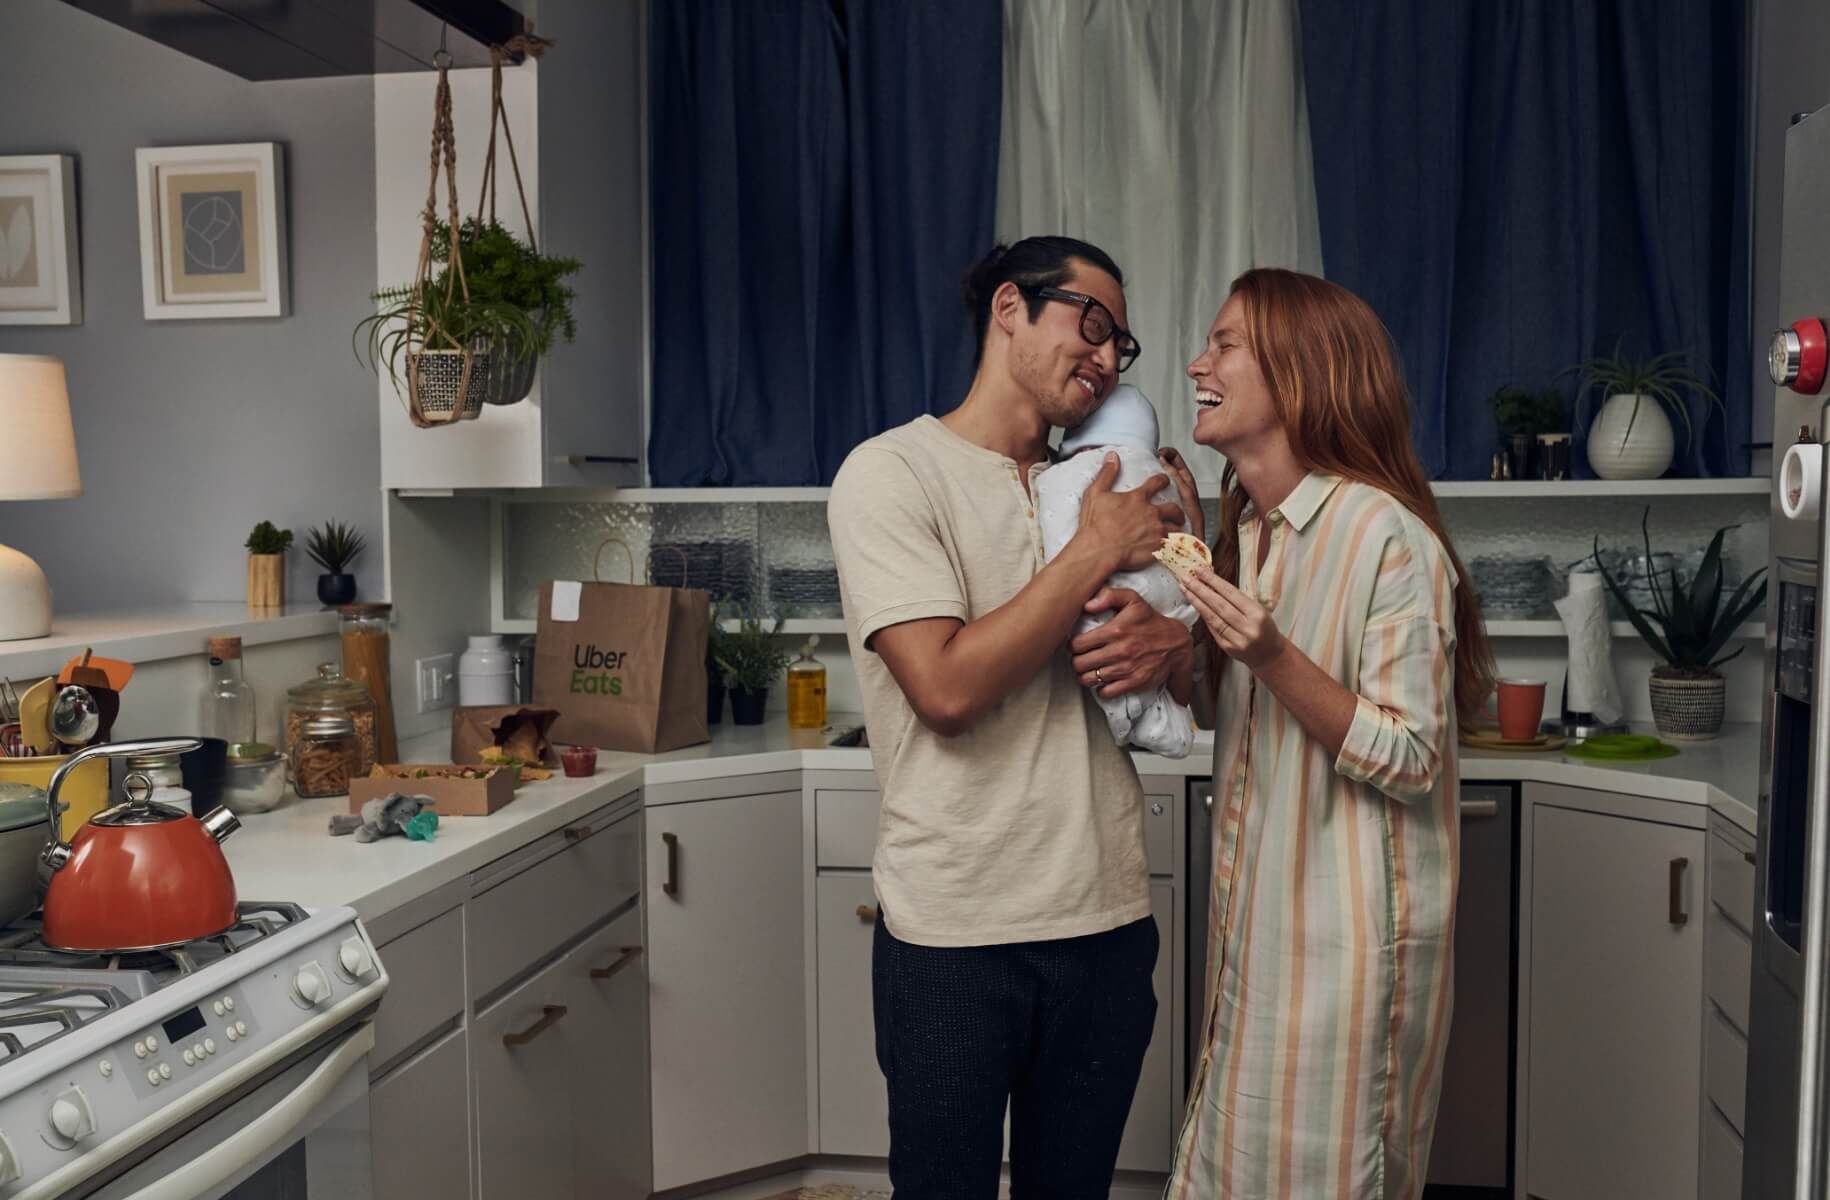 Couple smiling and eat uber eats in kitchen while holding baby at night